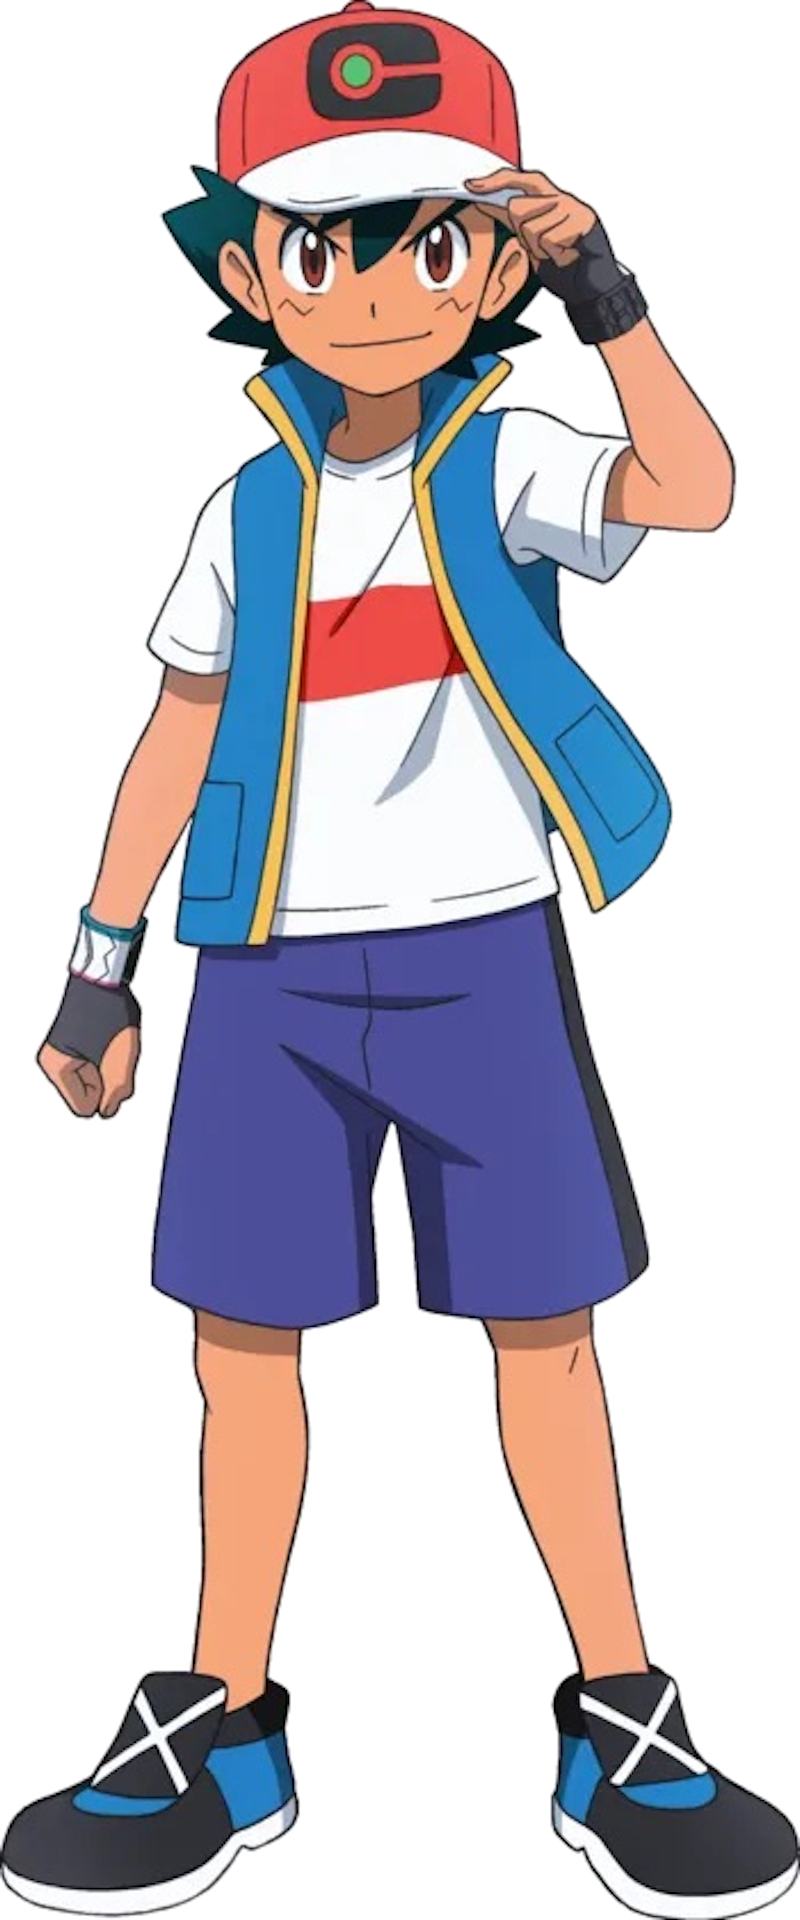 Is Ash, Red of the Red and Blue games in the anime